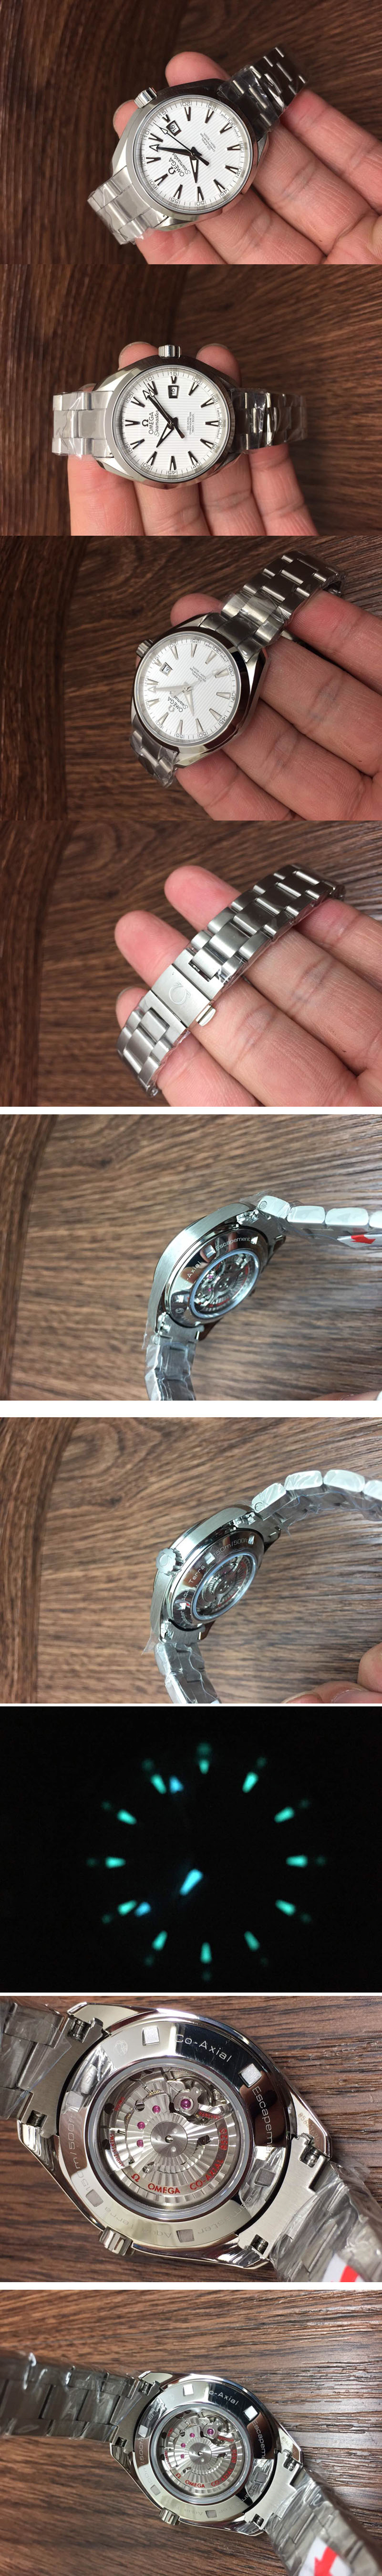 Replica Omega Watches